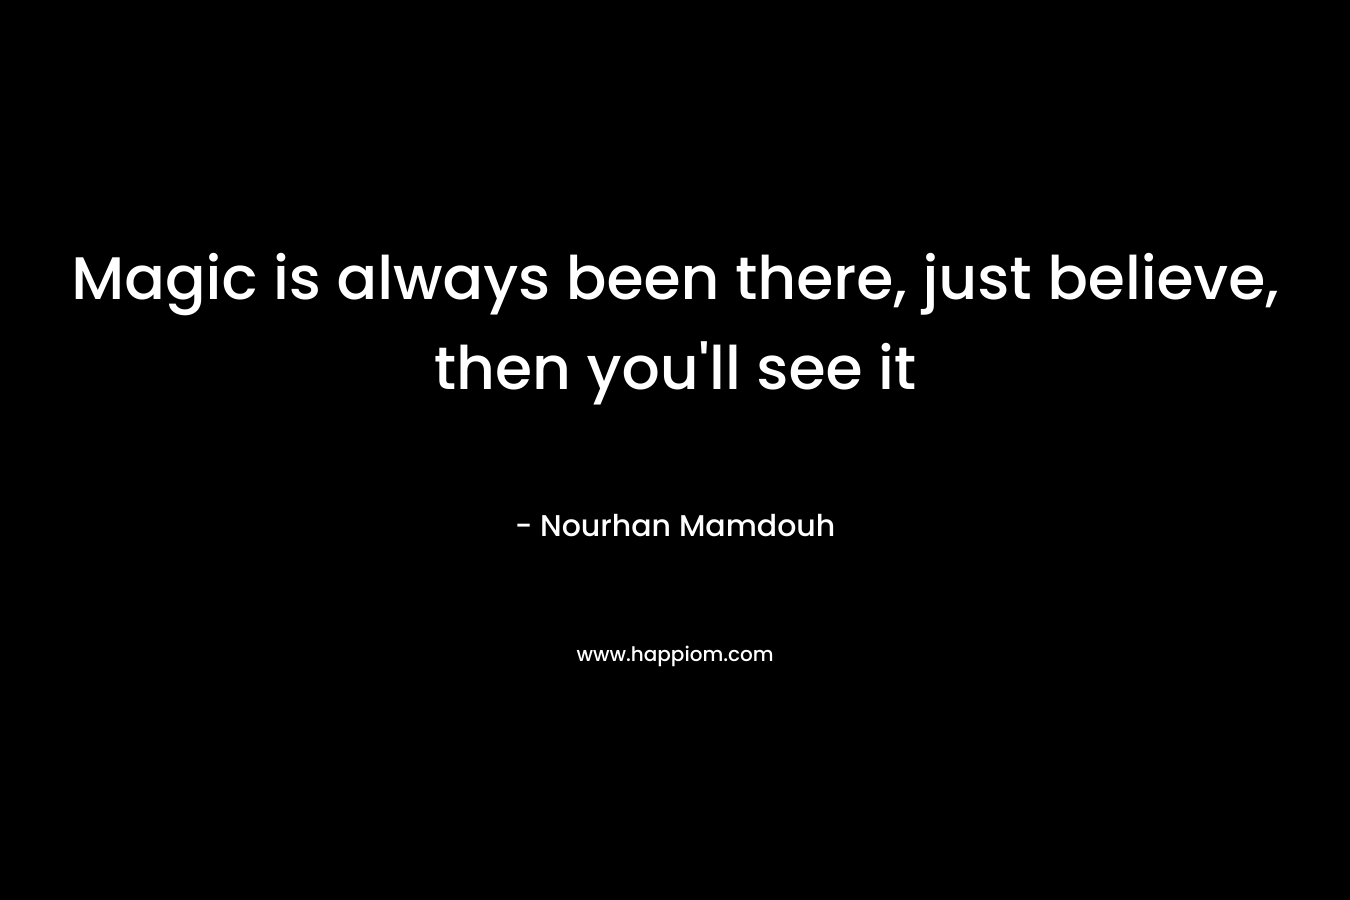 Magic is always been there, just believe, then you’ll see it – Nourhan Mamdouh